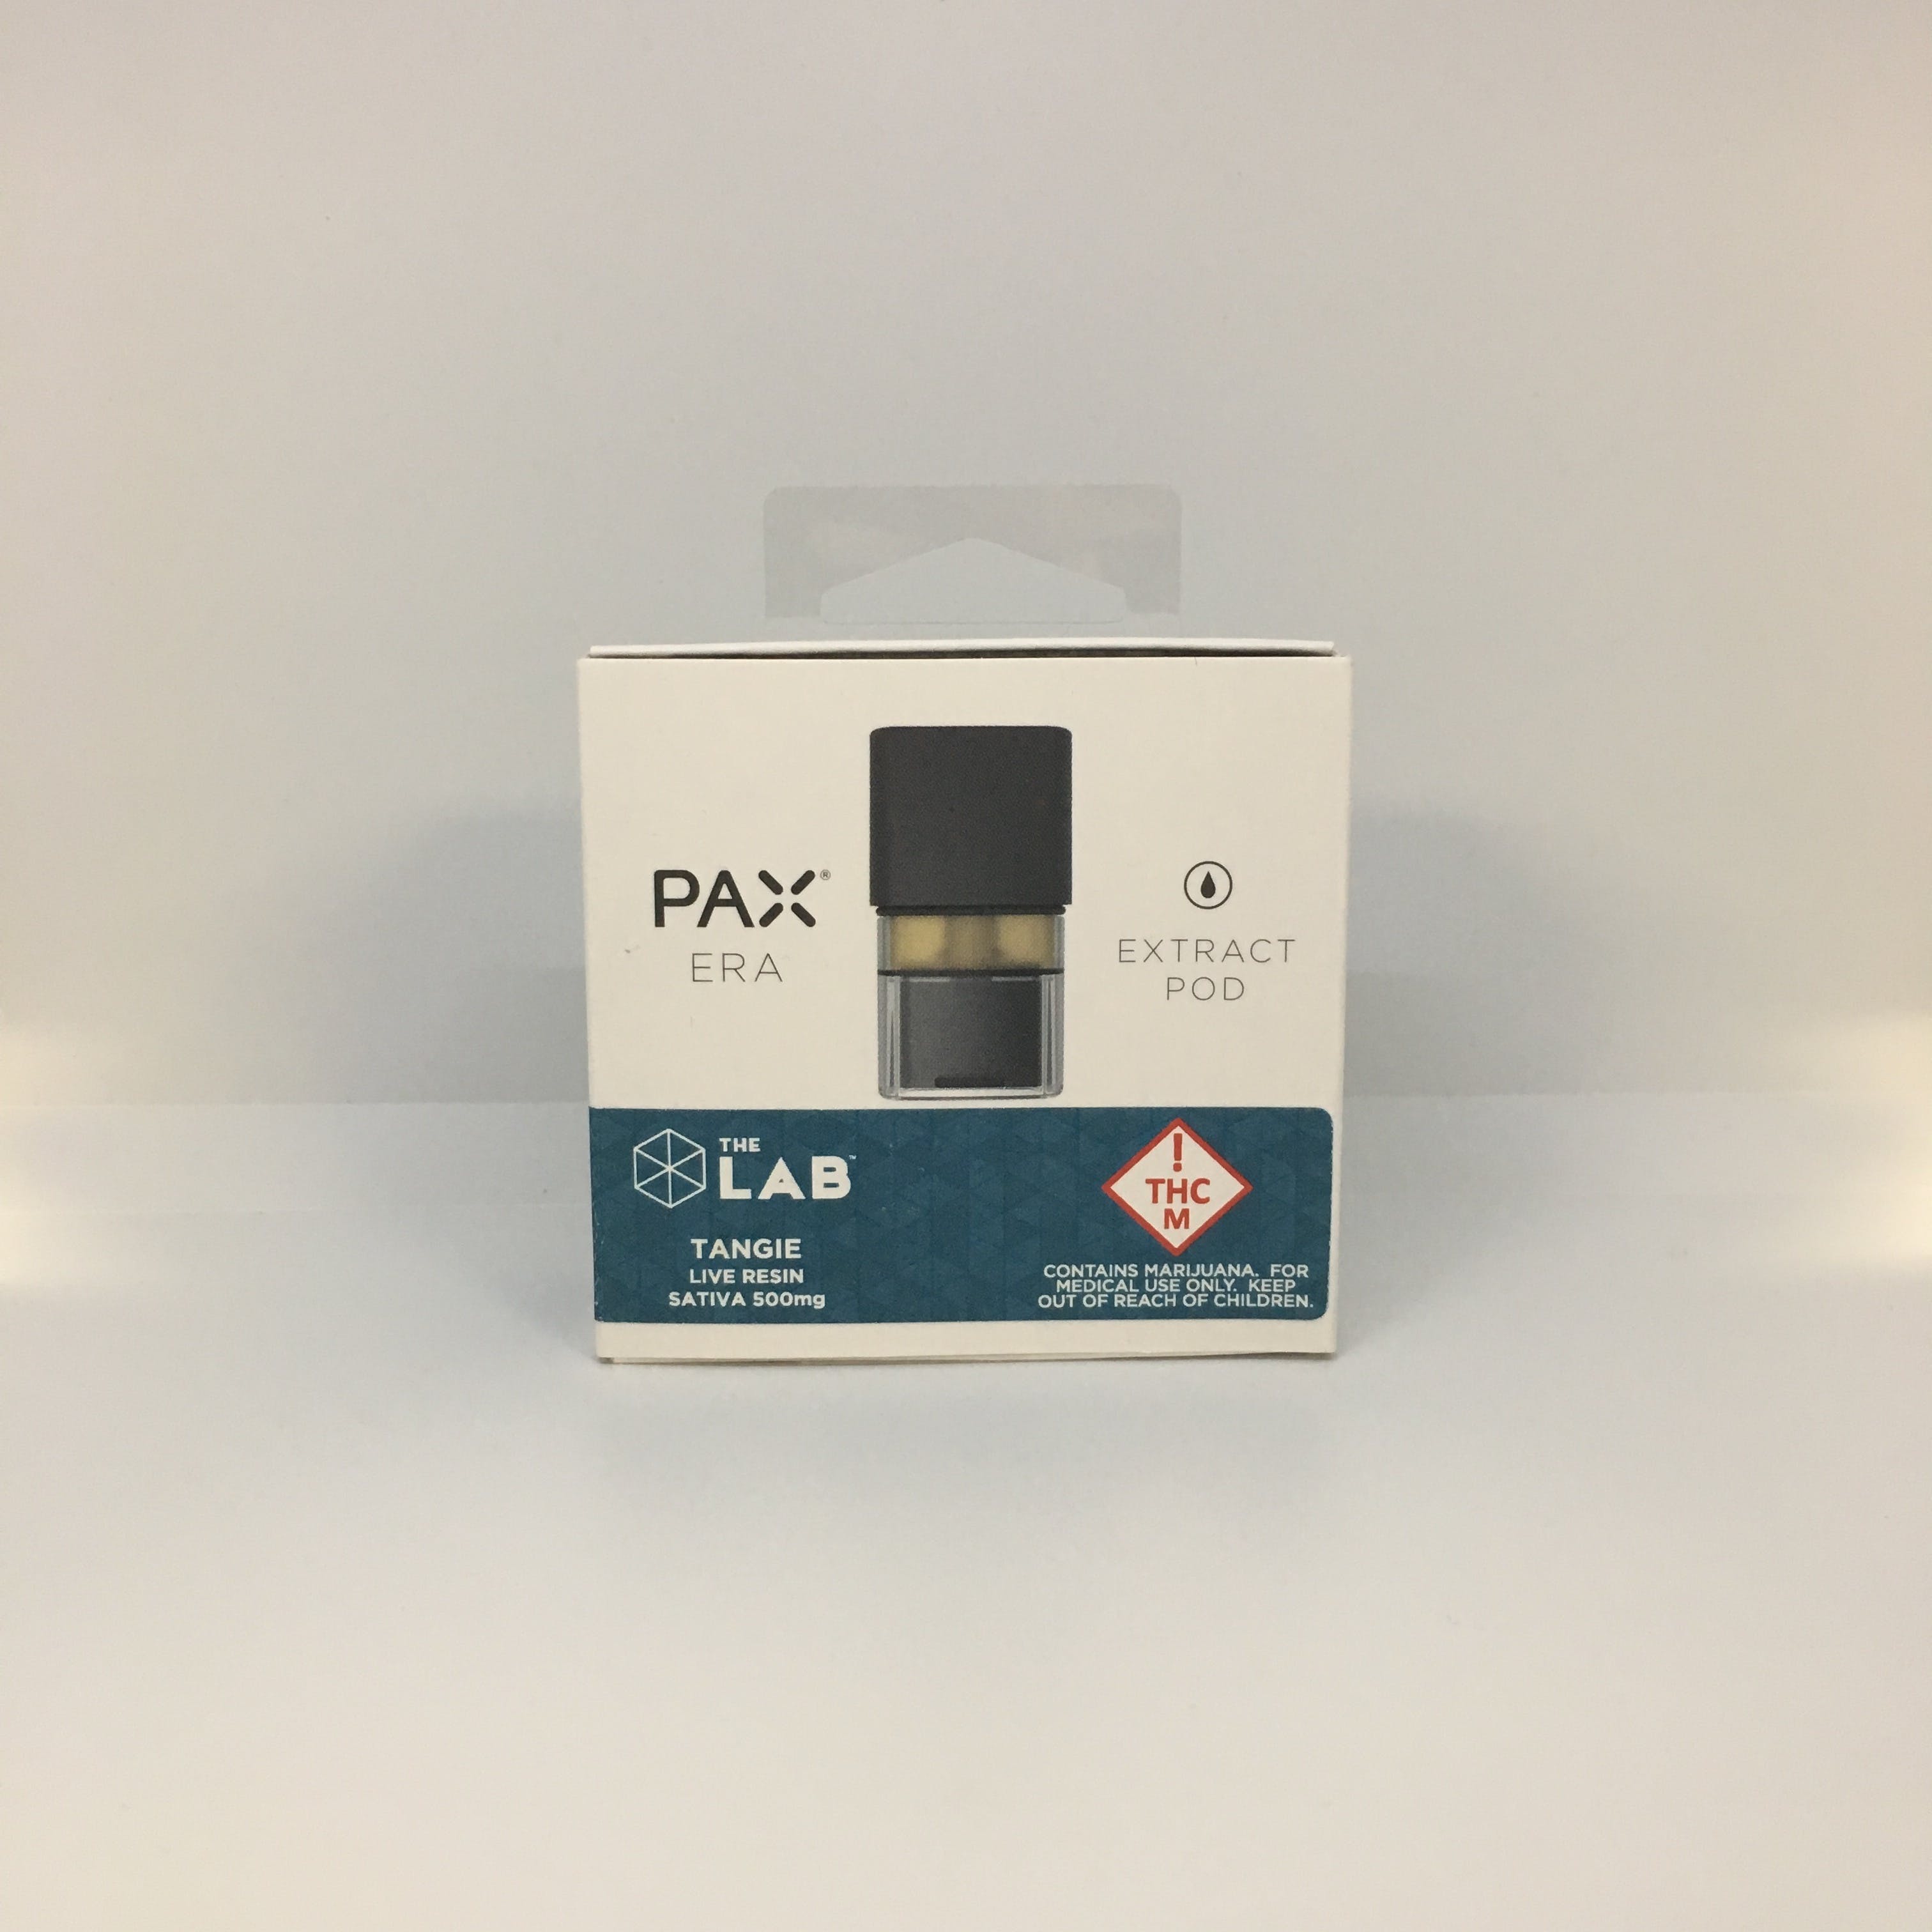 concentrate-pax-era-pod-2c-tangie-2c-live-resin-500mg